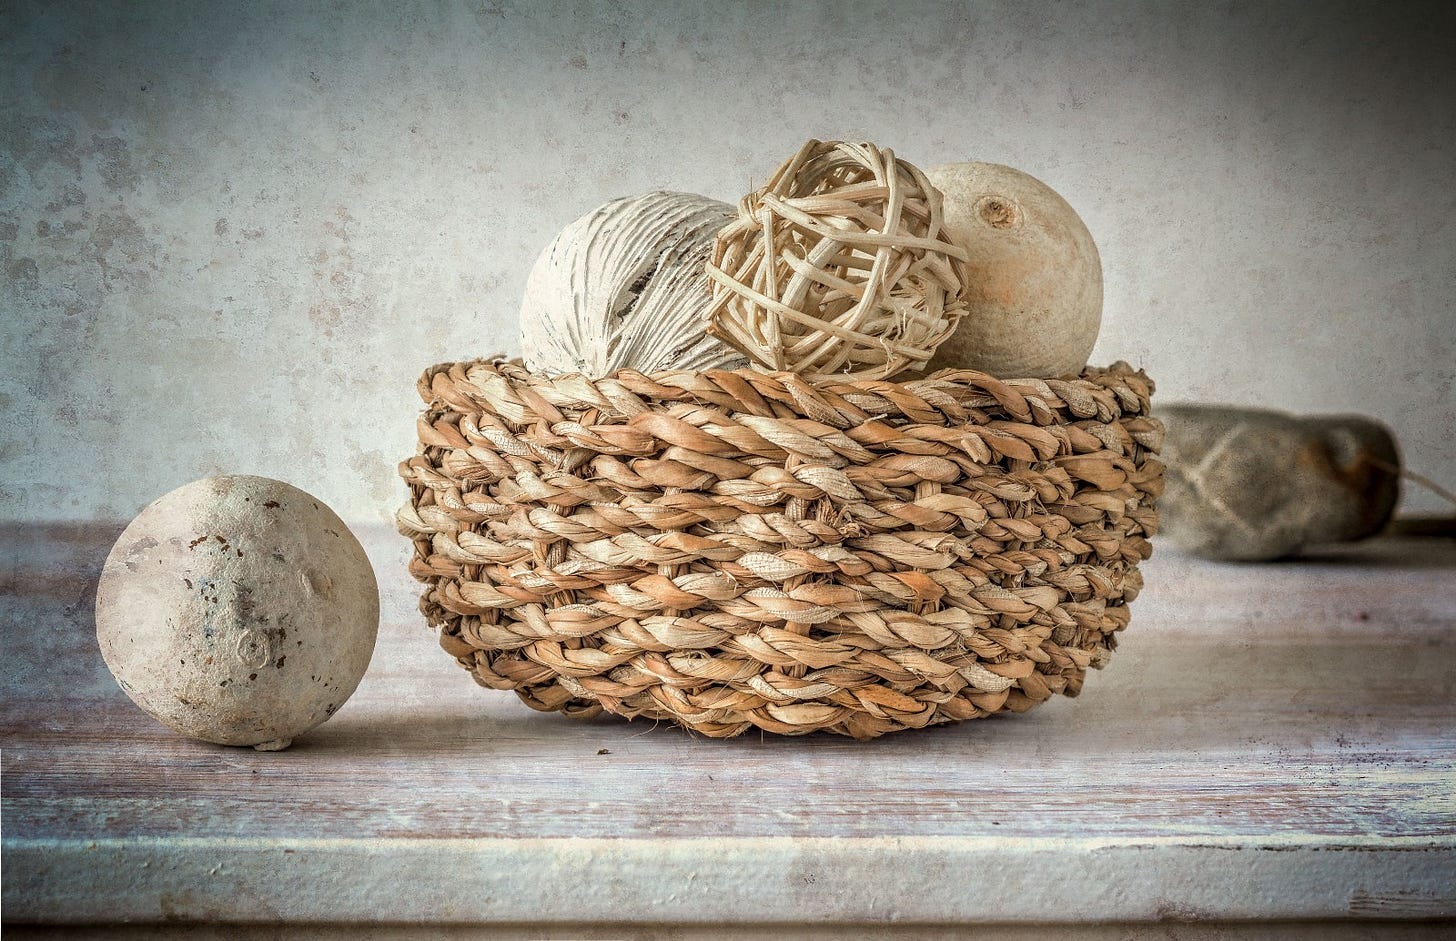 Textured, natural fibre balls in a rustic wicker basket on a table